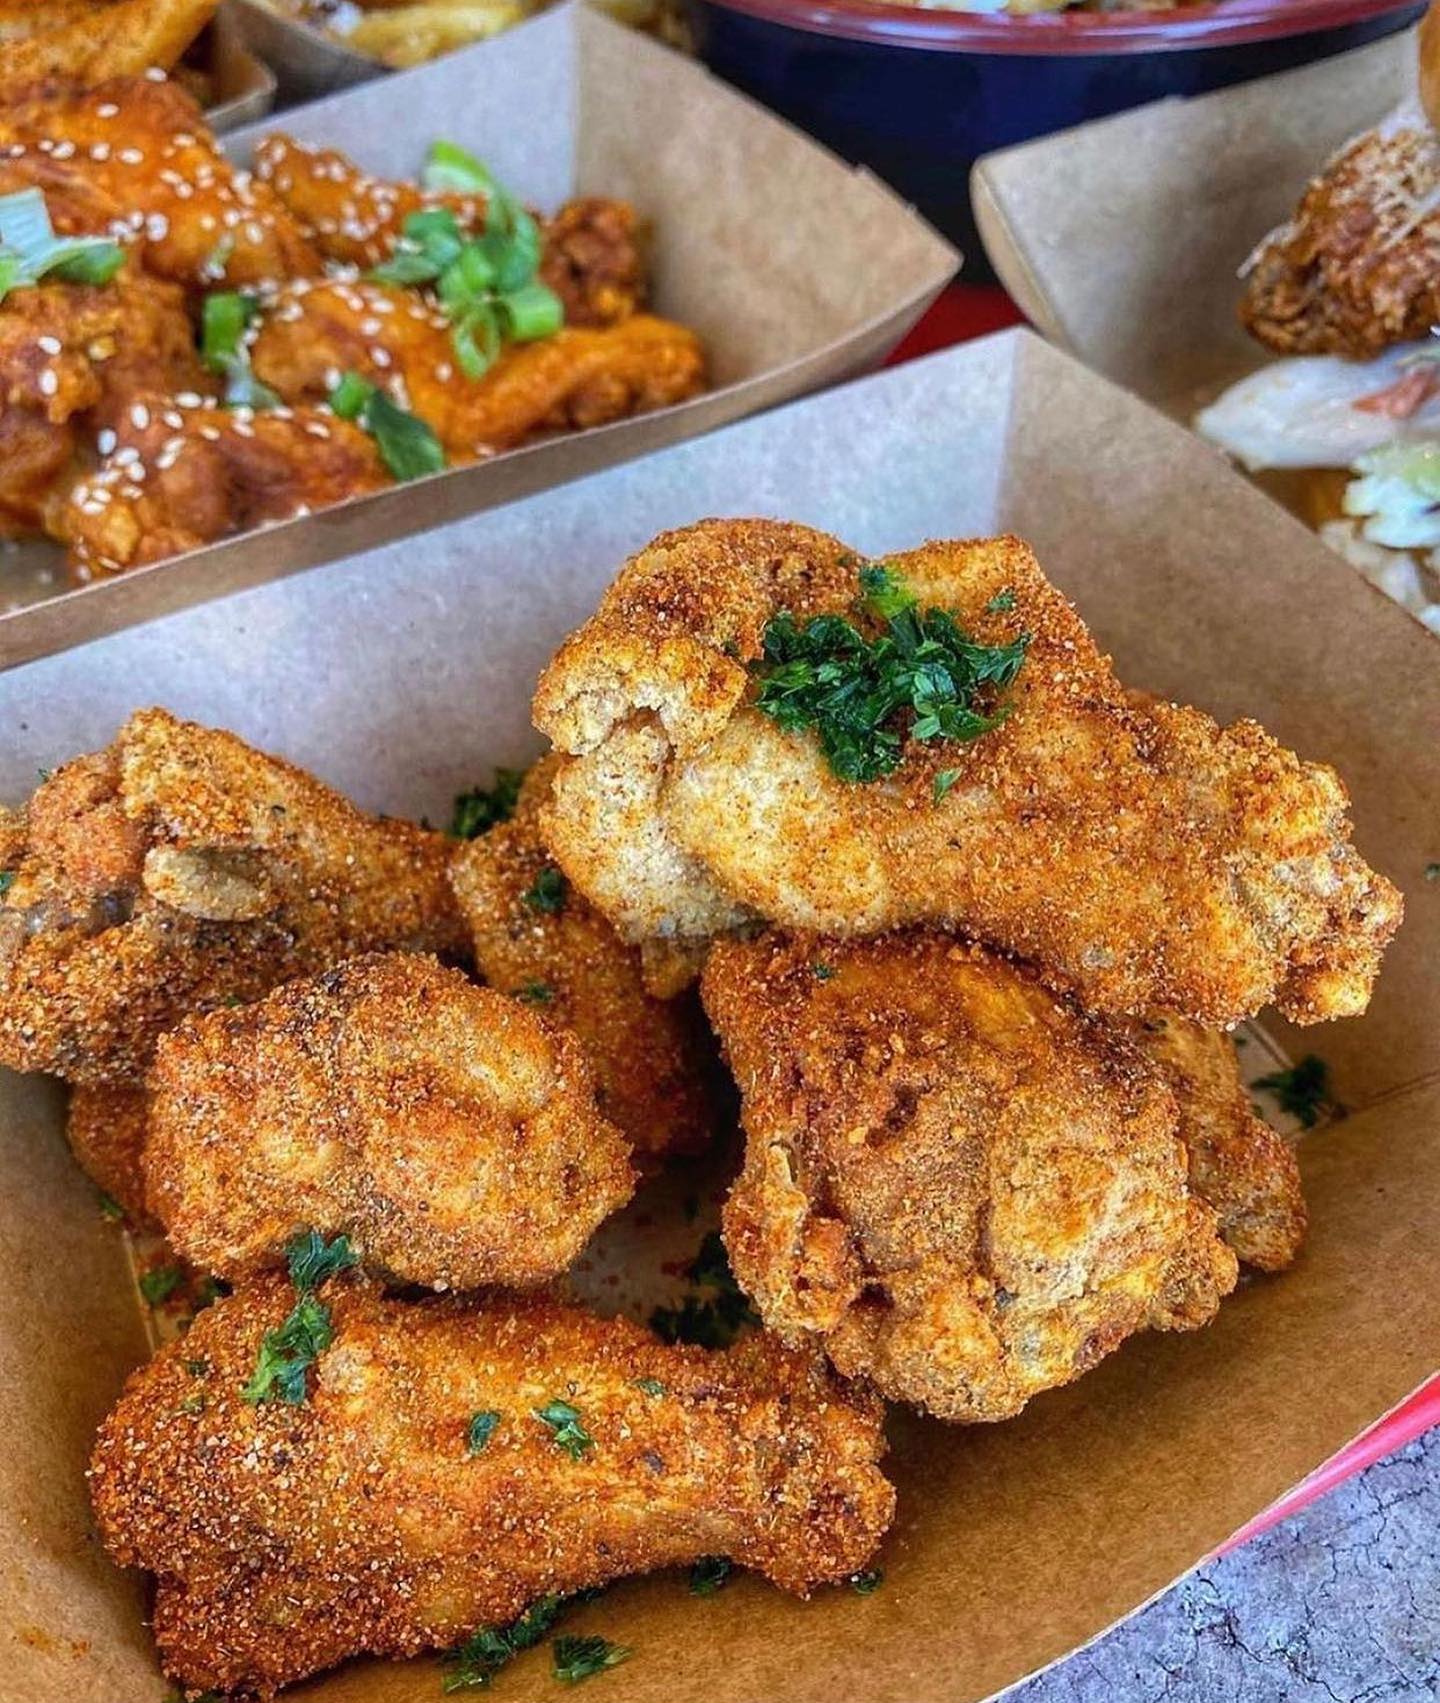 fried chicken wings in brown cardboard container